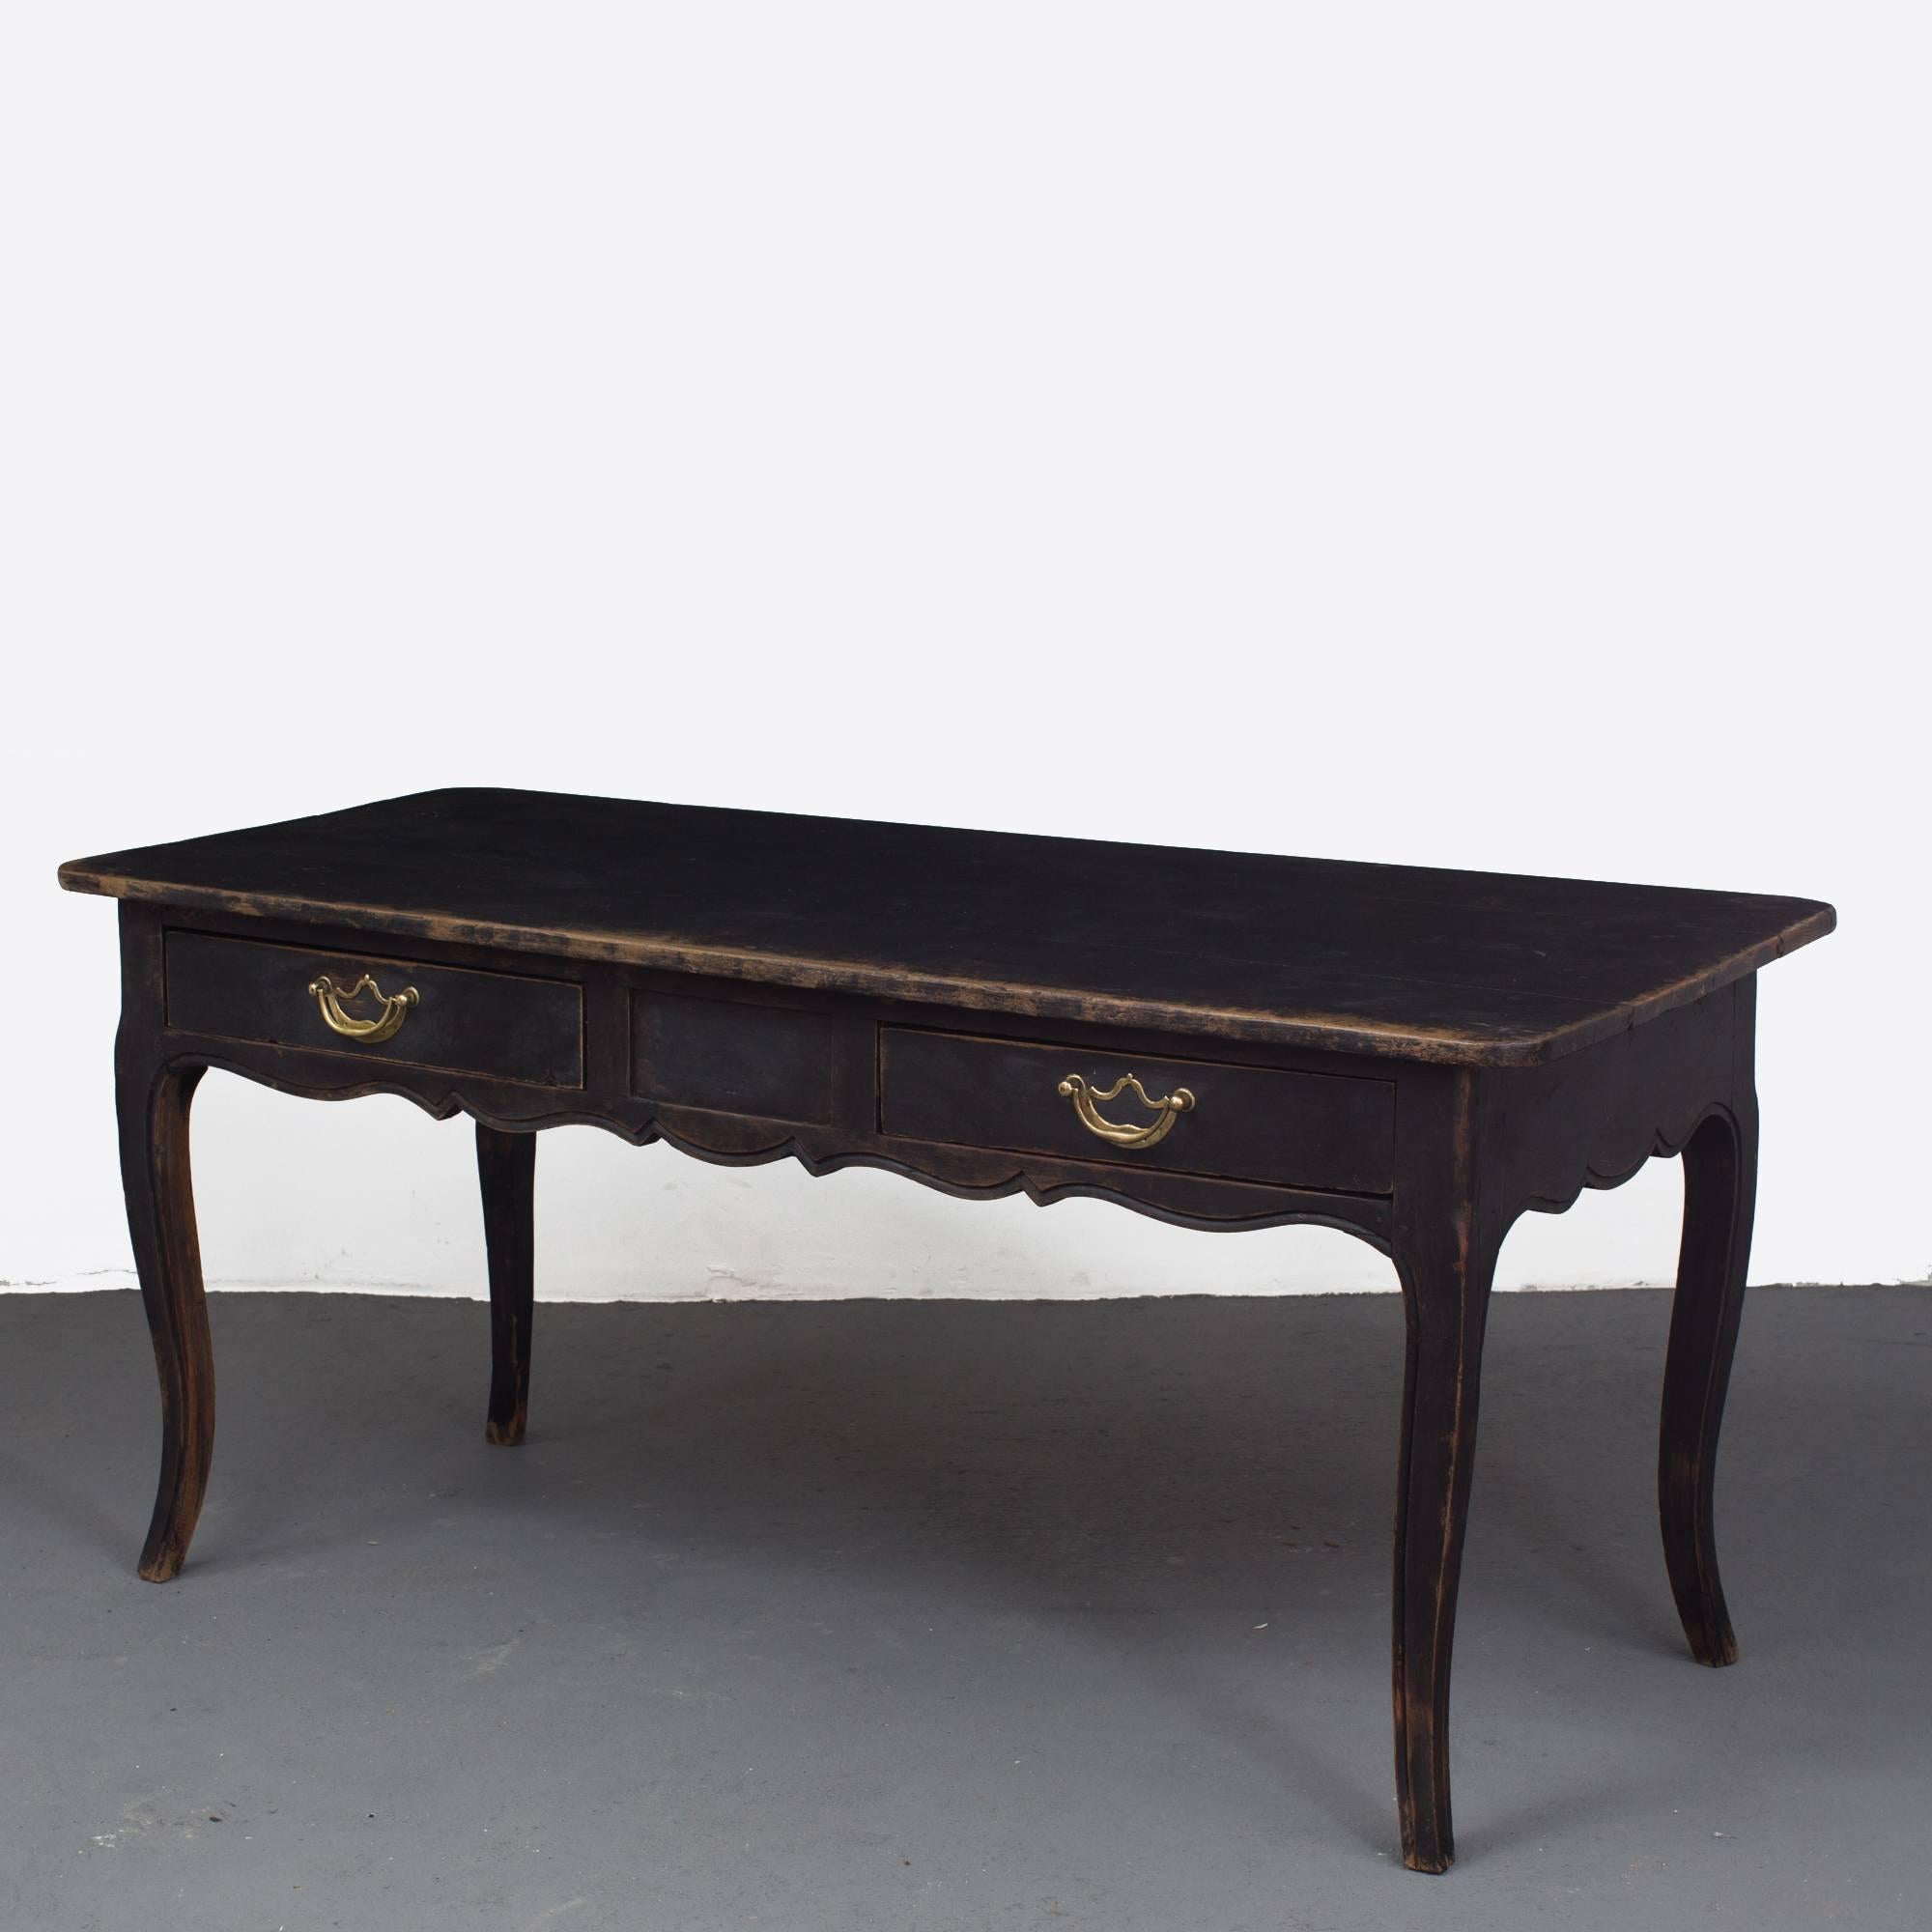 A desk made during the Rococo period 1720-1750 in France. Oak frame repainted in our custom paint finish 